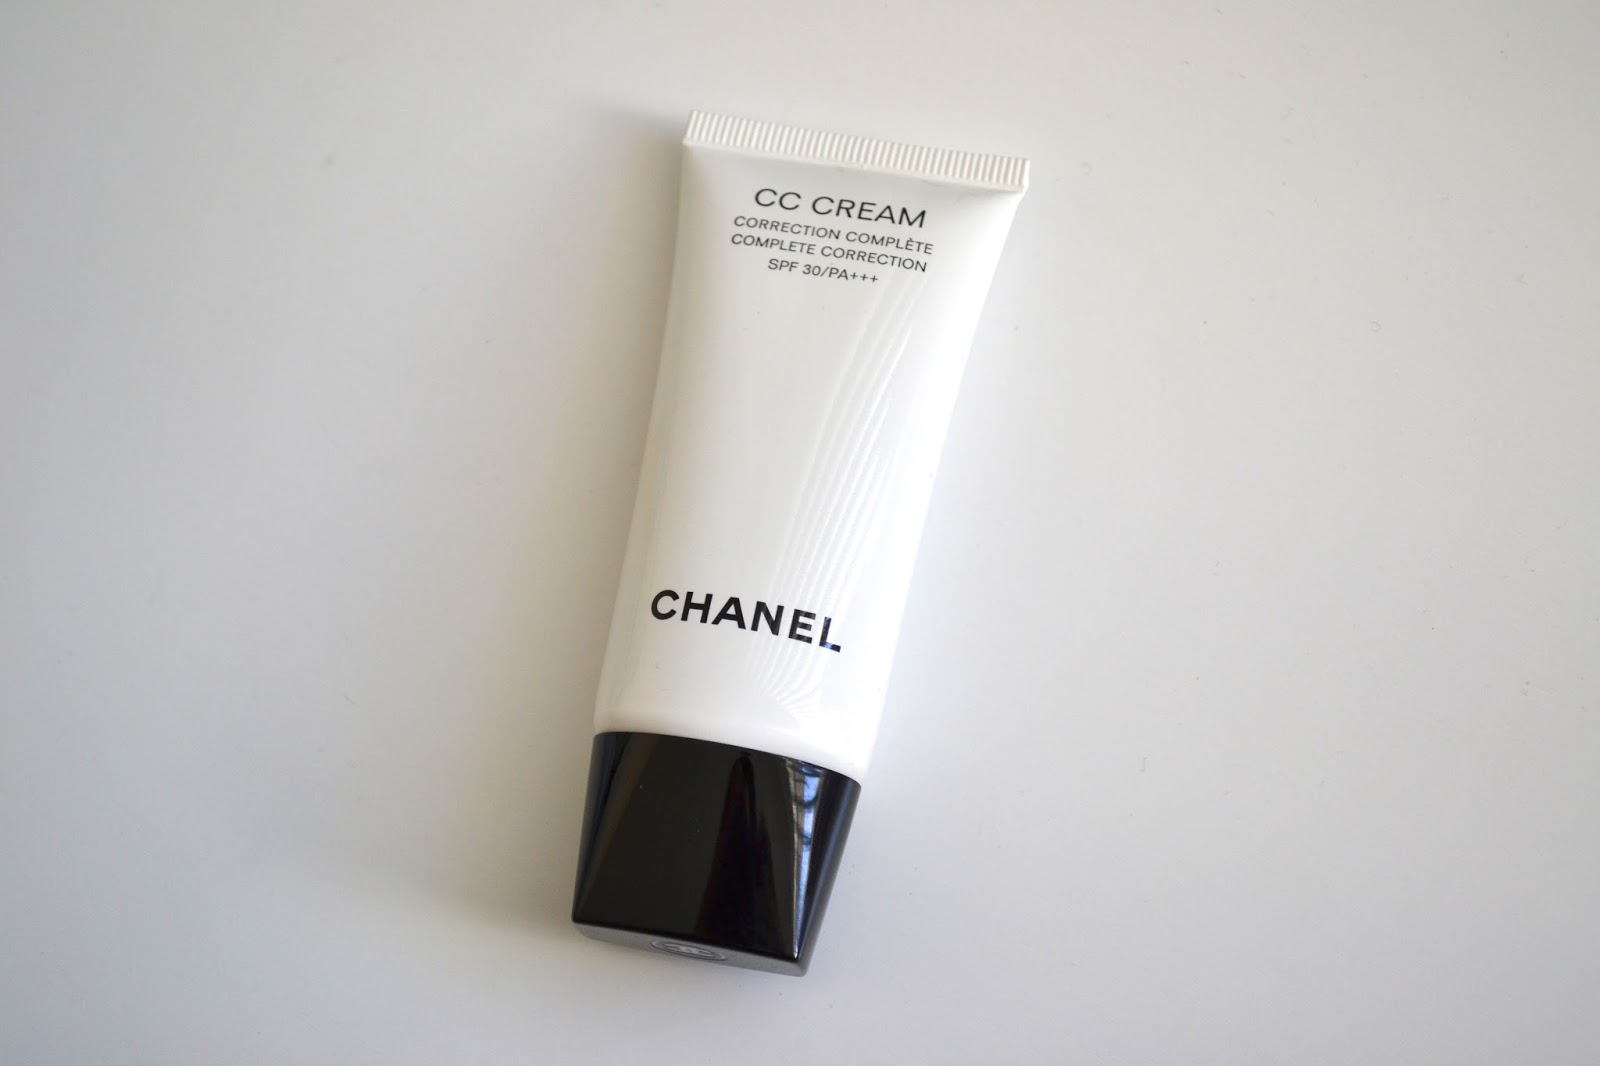 Chanel Les Beiges Sheer Healthy Glow SPF 30 Moisturizing Tint